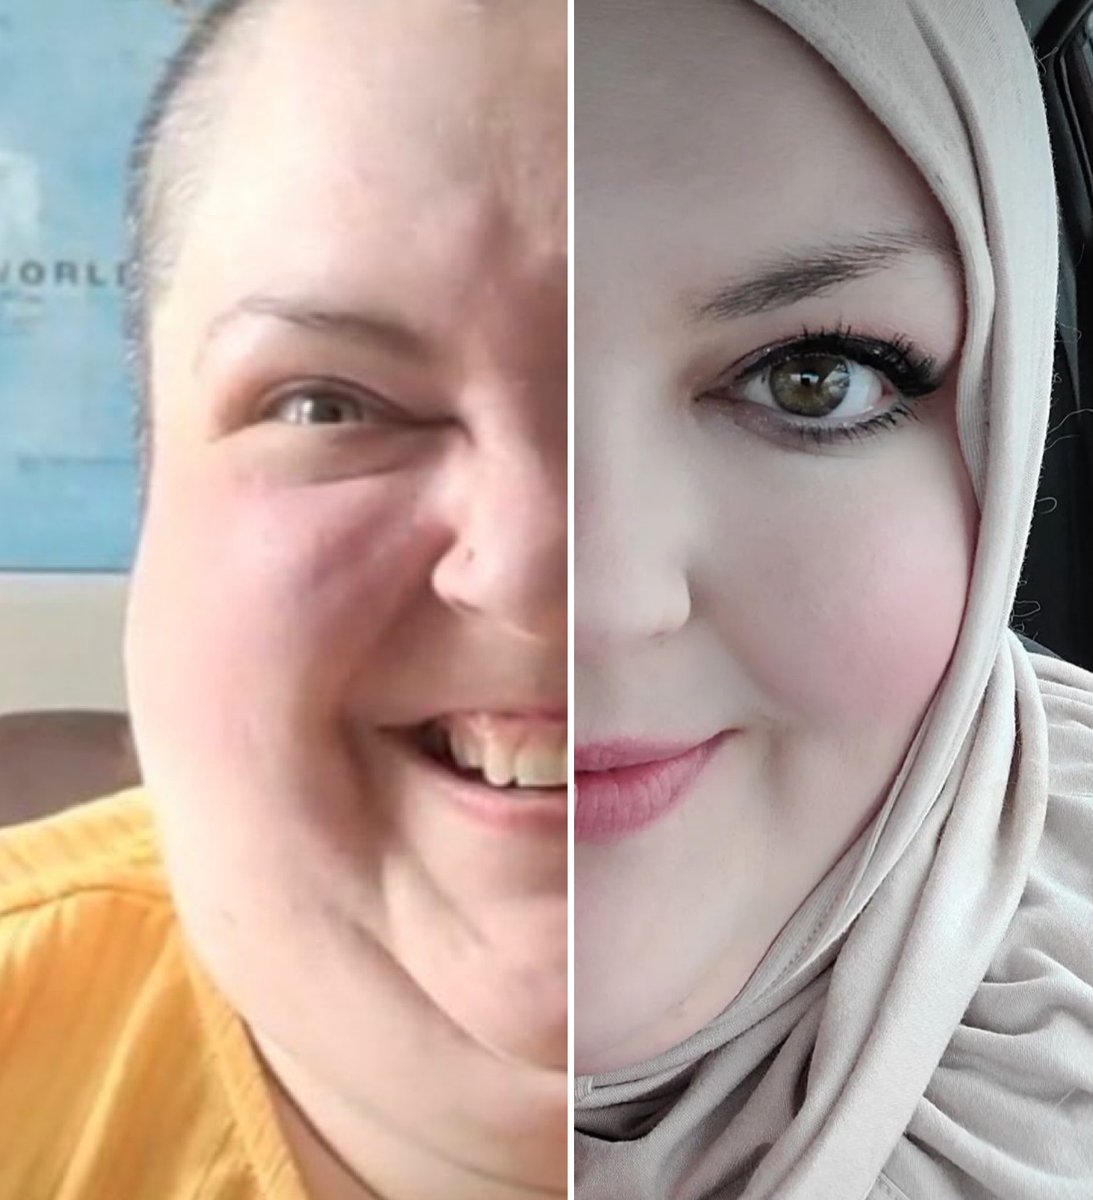 When is the Furburger not %100?!?!
Except lately, even the hijab & filters aren't doing much for them super CornFed Cornt Jethro jowls & gross wet baby bird skin eyelids..
That's all yours Salah! 

#FlapsMcNasty #FoodieBeauty #EverydayMariam #MichealFurburger
#SalahTwerks